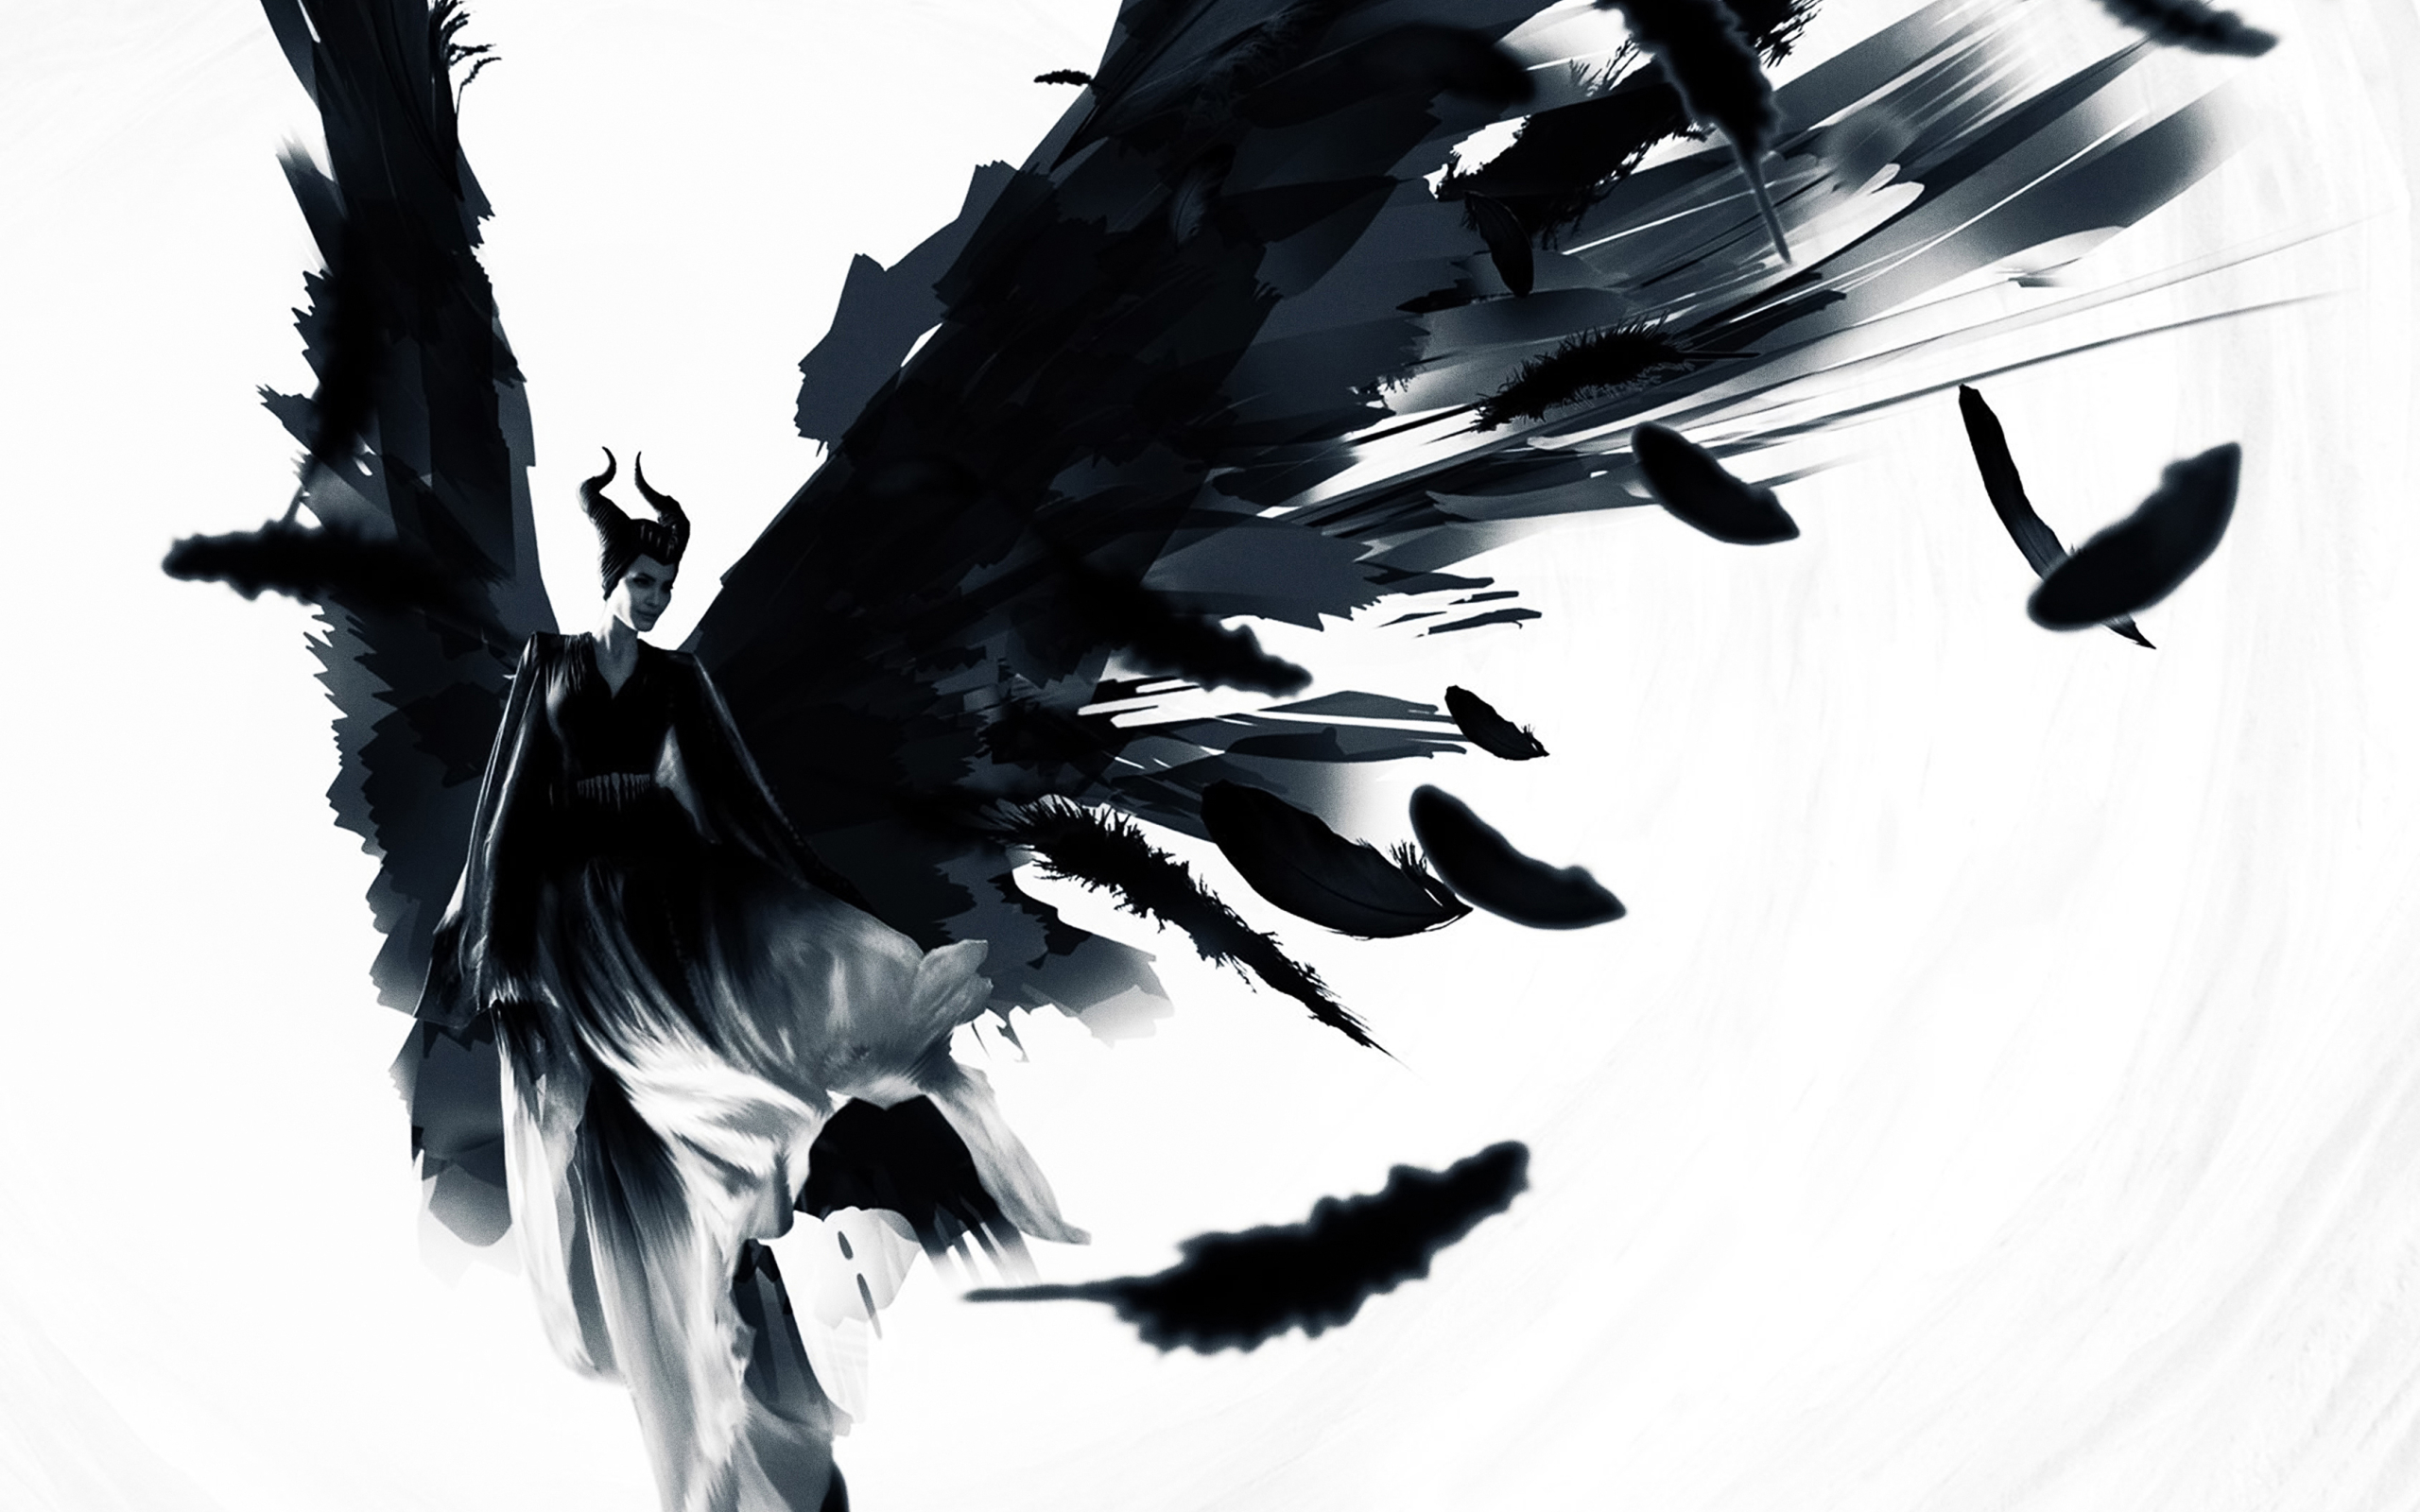 2560x1600 Resolution Poster Of Maleficent Mistress of Evil Movie ...